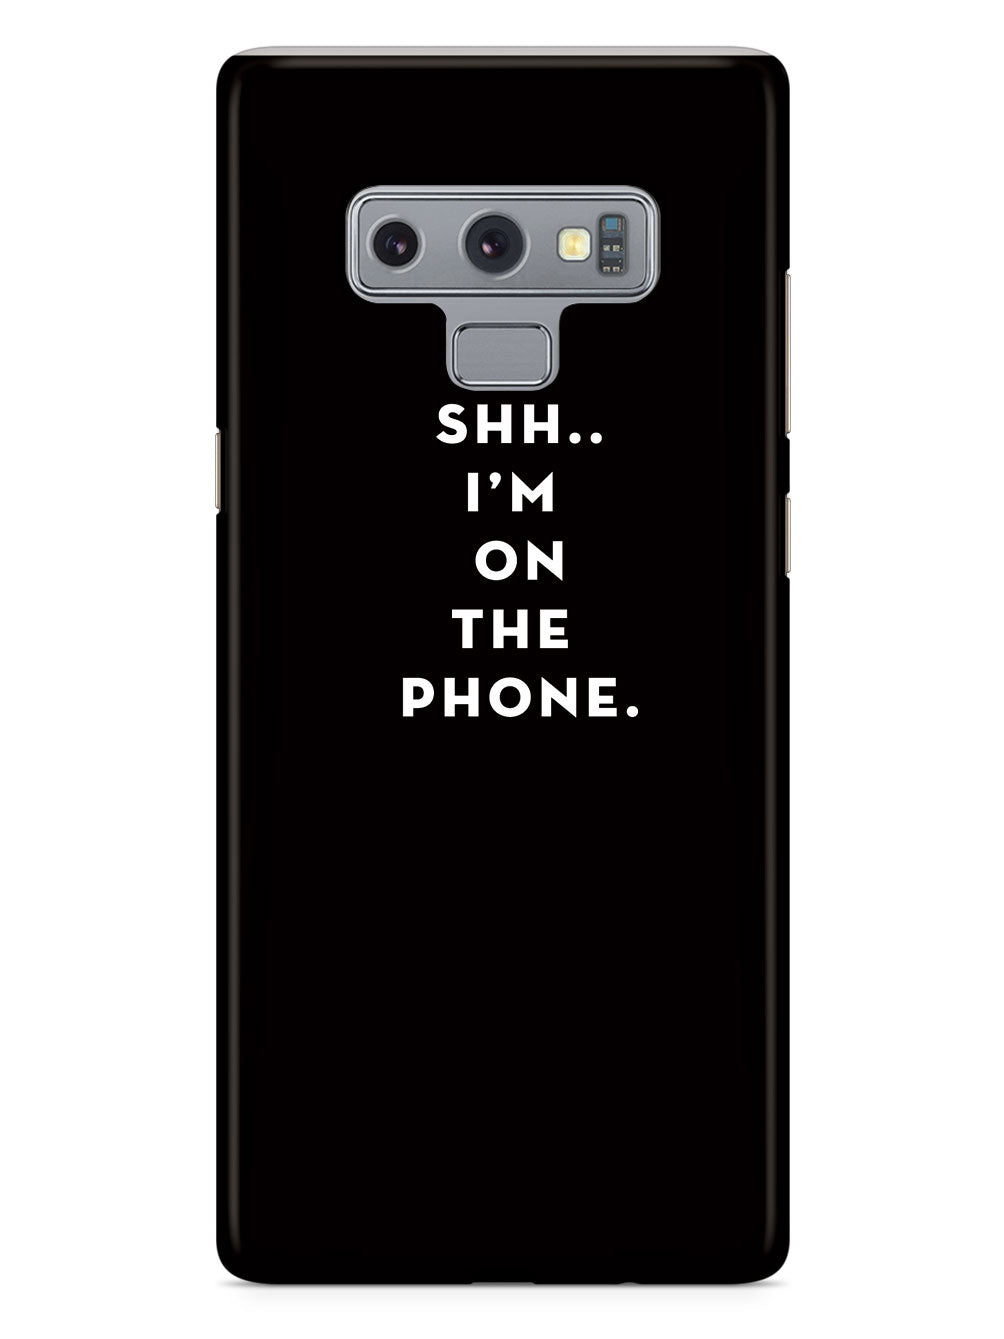 Shh..I'm on the Phone - Humor Funny Case